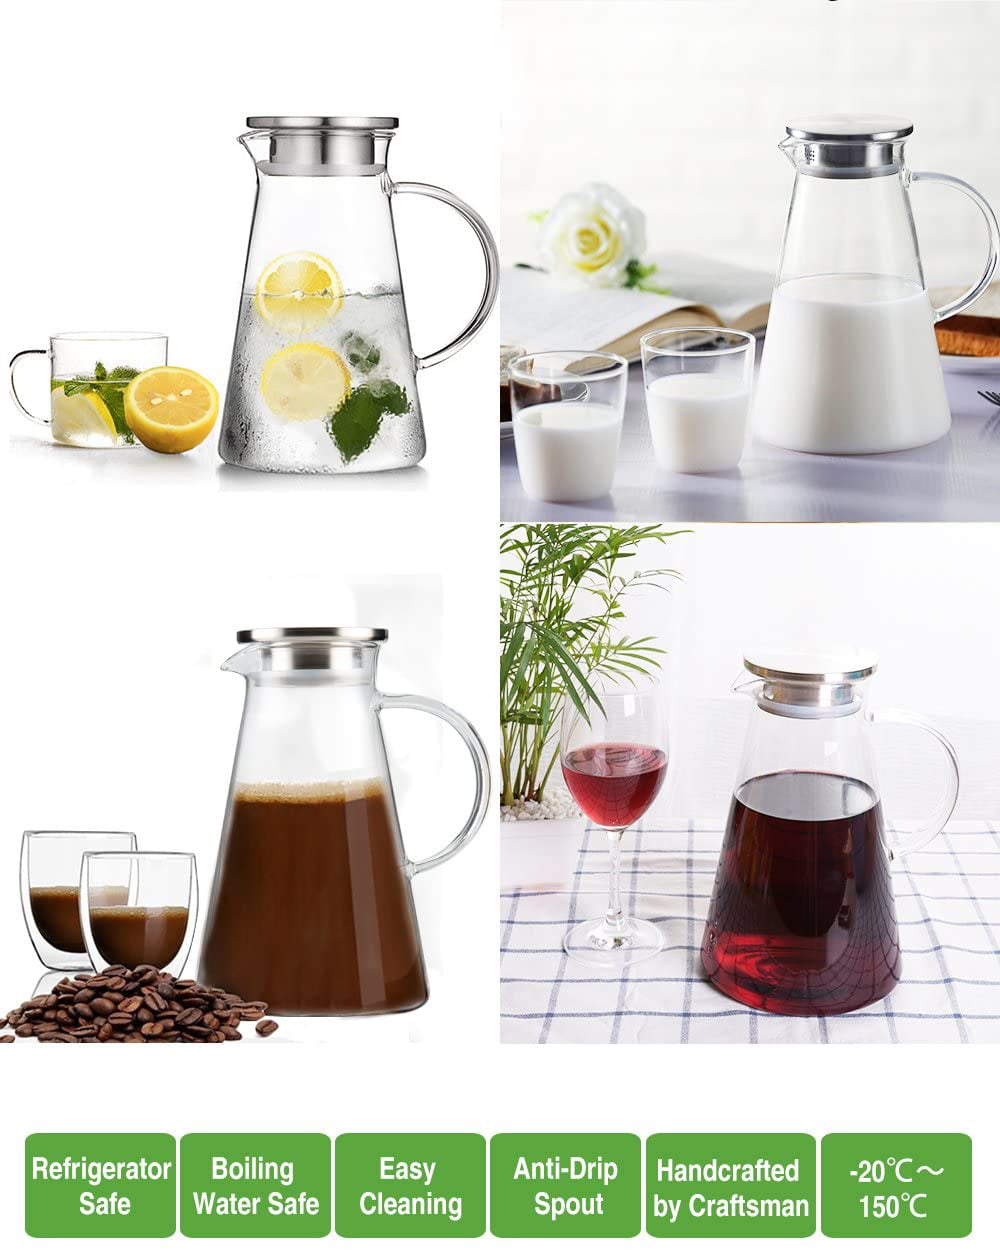 1.5 Liter 51 oz Glass Pitcher with Lid, Glass Water Pitcher for Fridge, Glass Carafe for Hot/Cold Water, Iced Tea Pitcher, Large Pitcher for Coffee, J